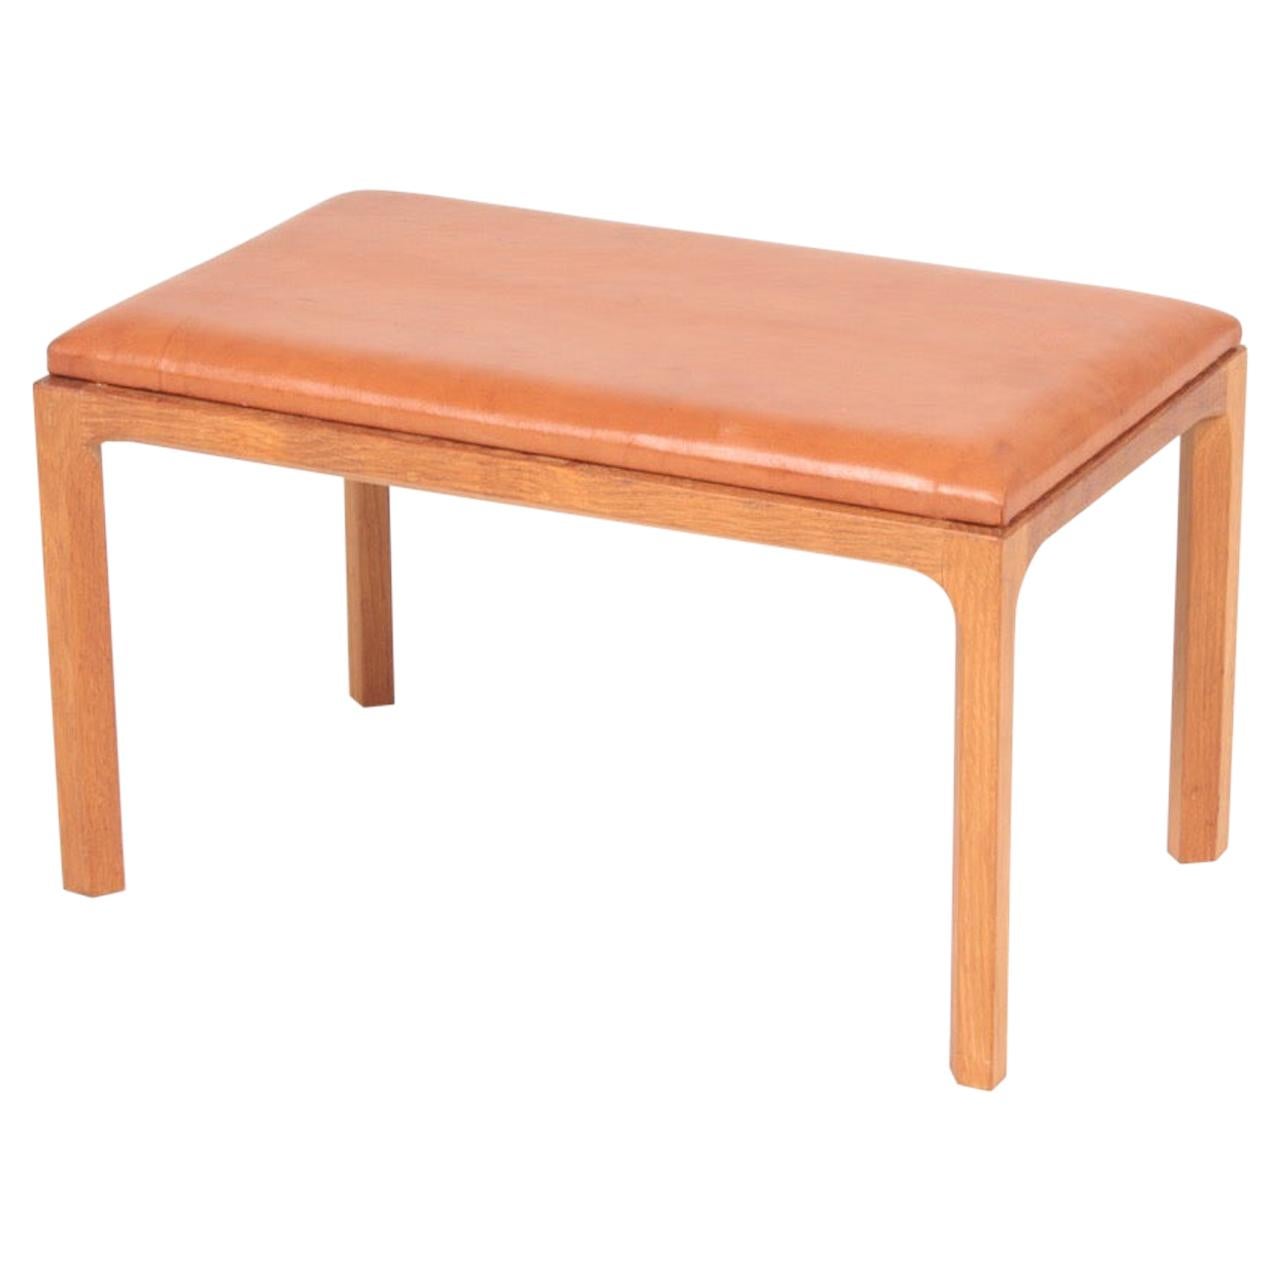 Danish Midcentury Stool in Patinated Leather and Oak by Kai Kristiansen